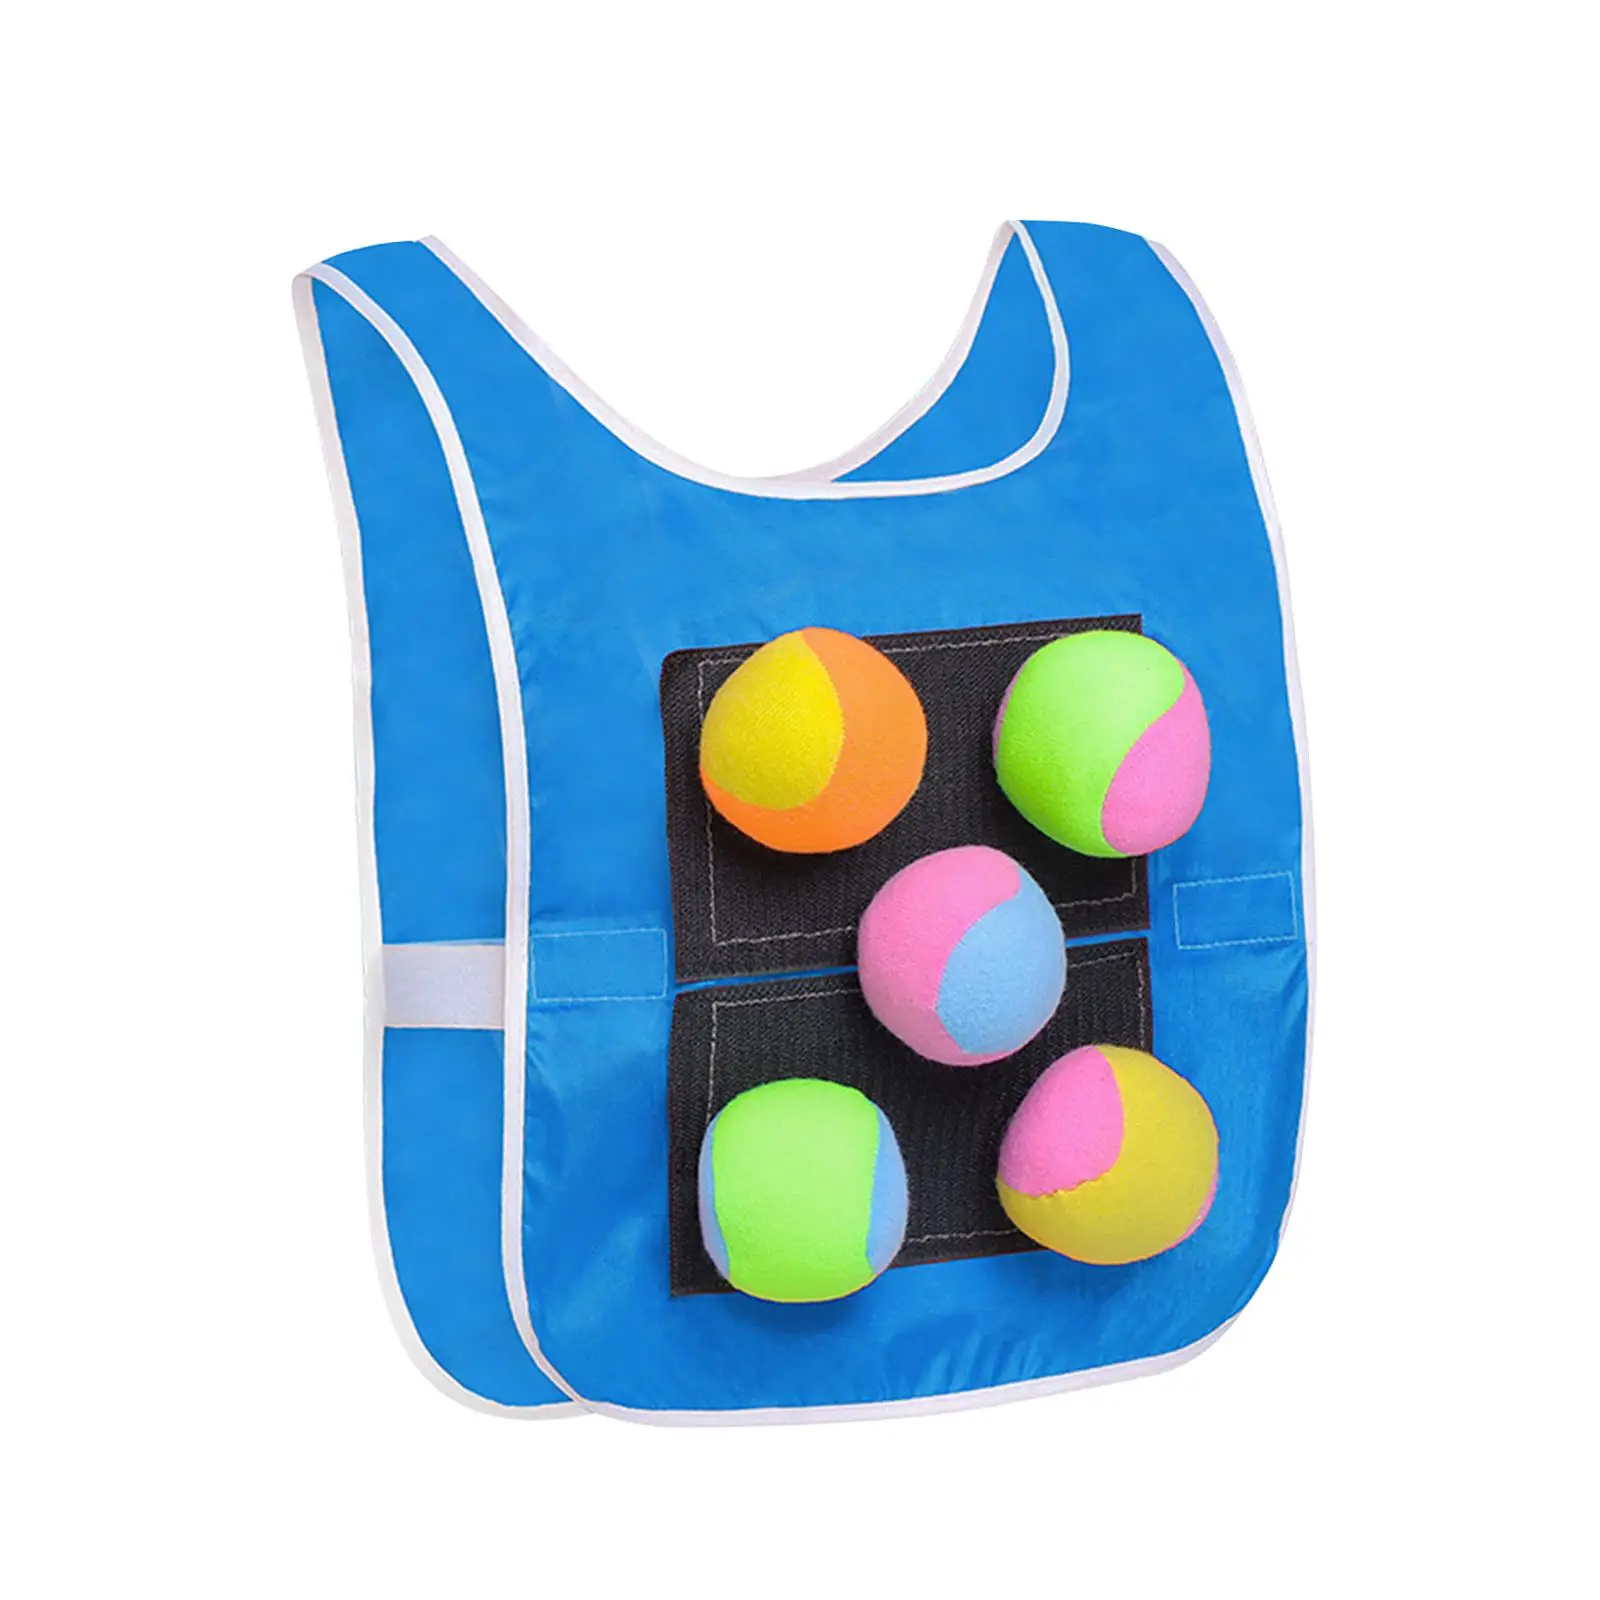 Dodgeball Game 5 Sticky Ball Toy Party Game Sticky Ball Vest Dodgeball Ball Game for Outside Beach Lawn Camping Outdoor Activity